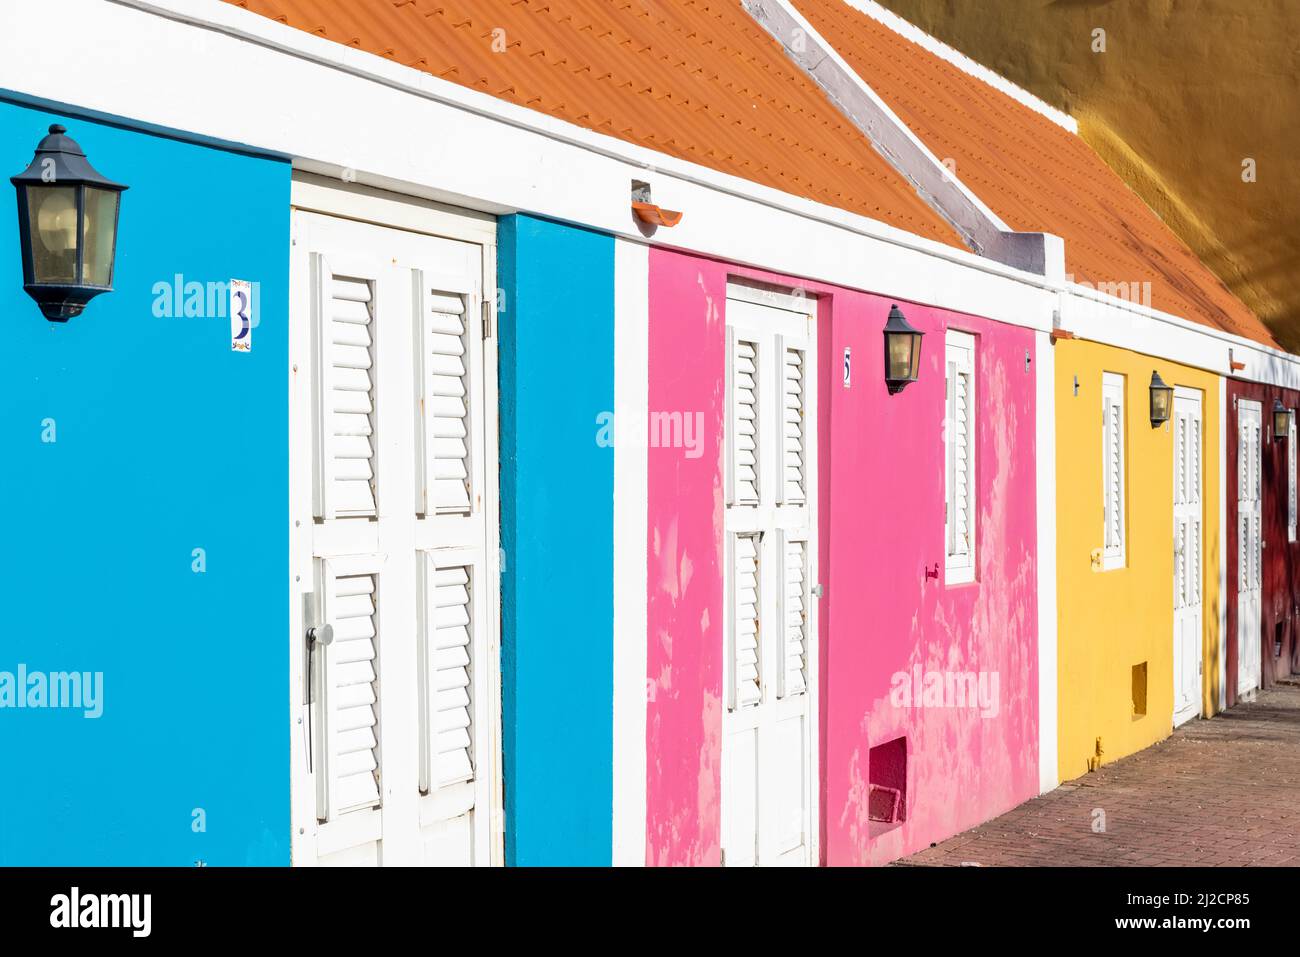 Row of colorful houses in Willemstad, Curacao Stock Photo